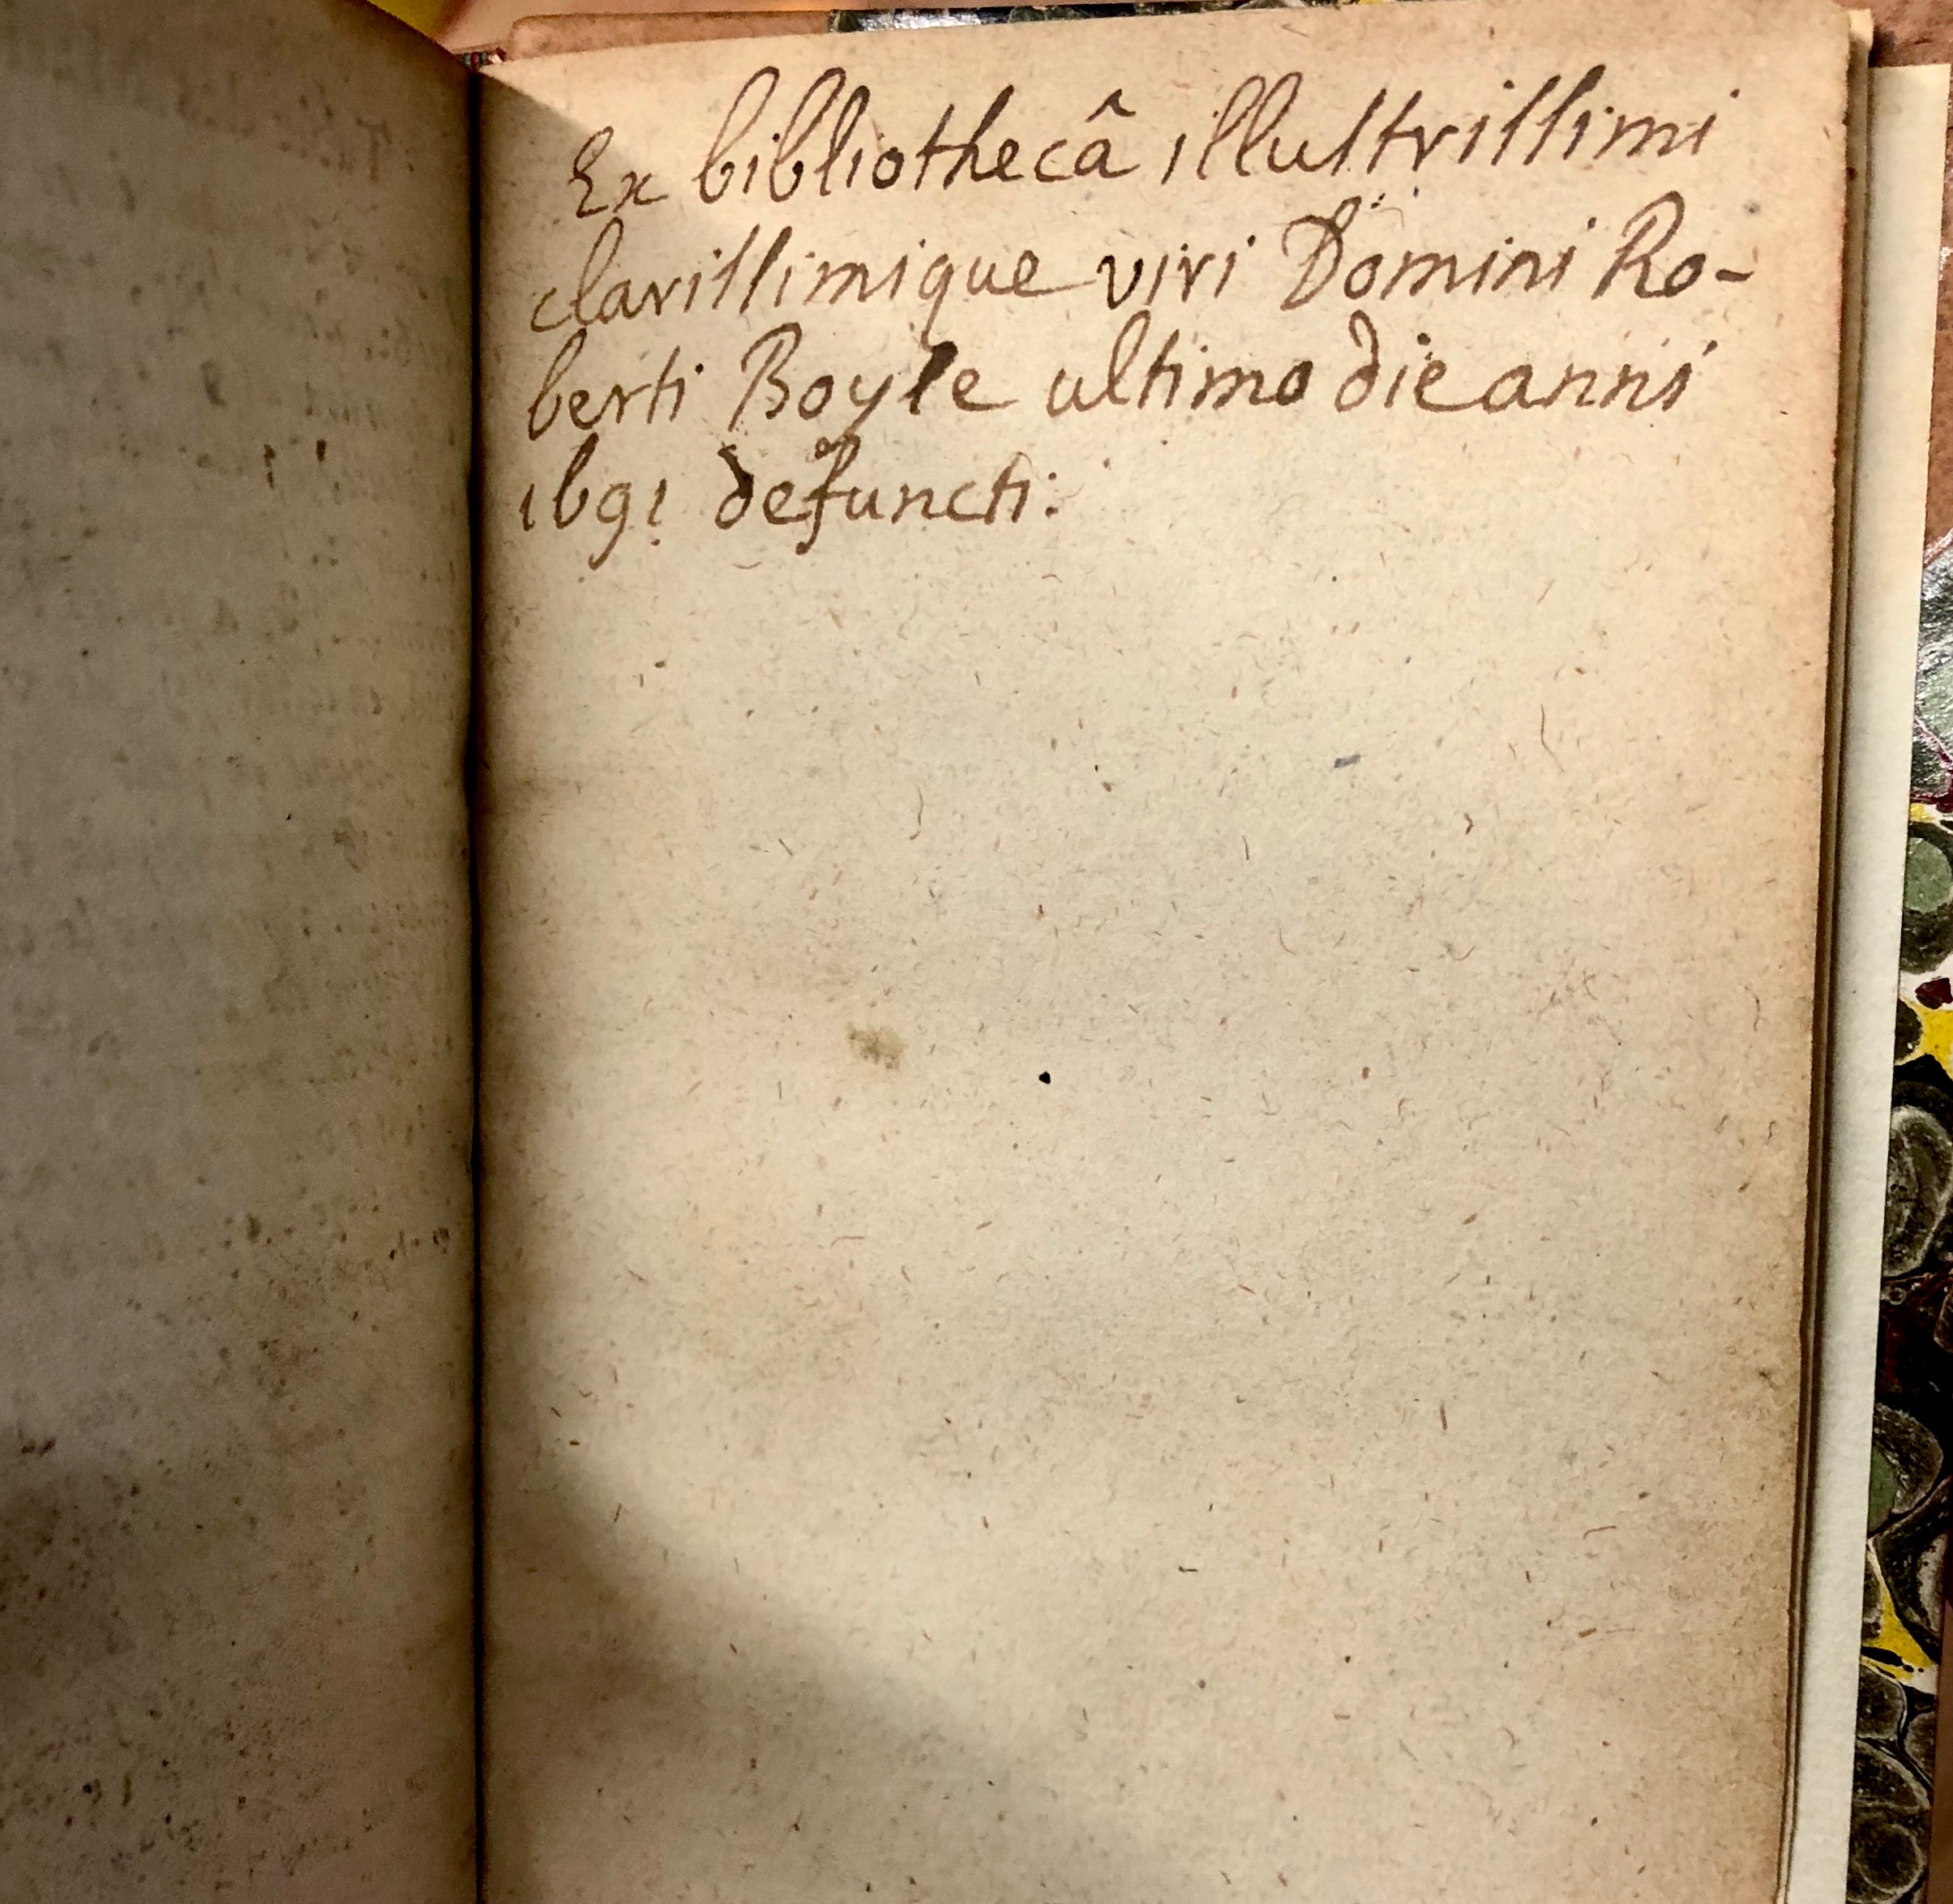 Manuscript note confirming that Robert Boyle owned this book! 'Traittez des baromètres, thermomètres, et notiomètres : ou hygromètres' by Joachim d'Alence, 1688, Amsterdam. (Maddison Collection 2A5, F10456500)